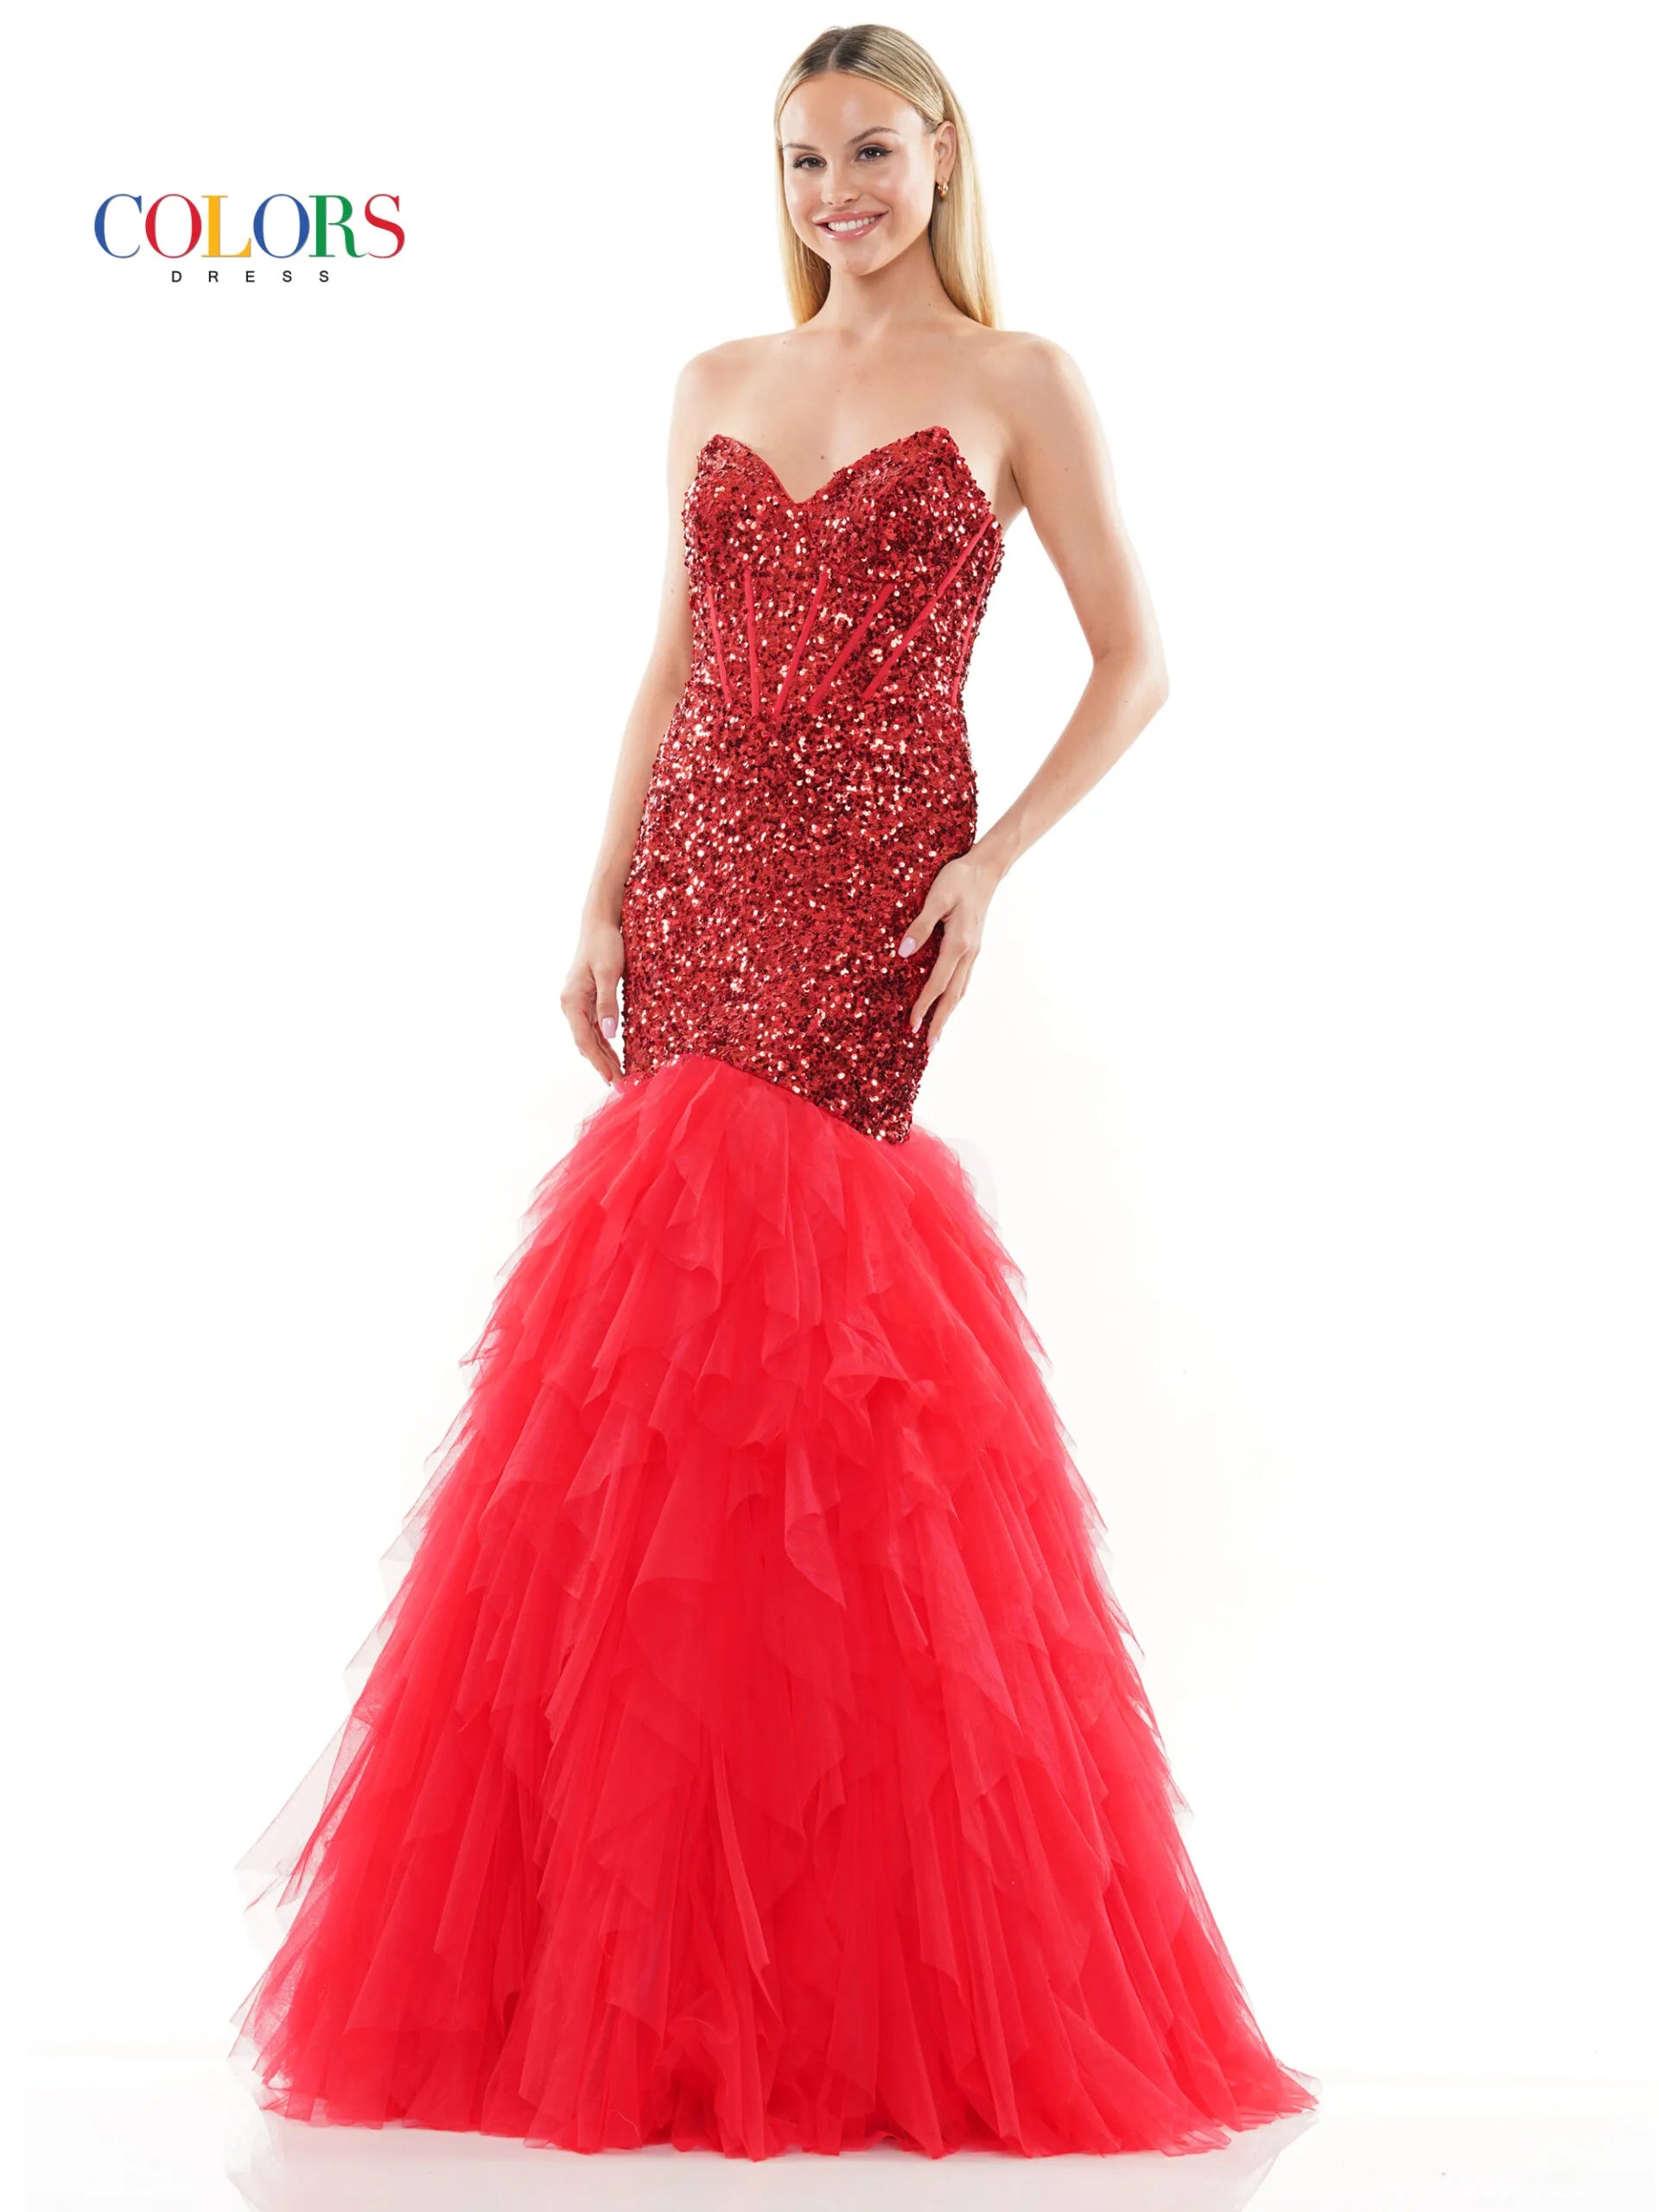 SALE ! SPECIAL OCCASION PROM FITTED RED CARPET DRESSES LONG FORMAL EVENING  GOWNS | eBay